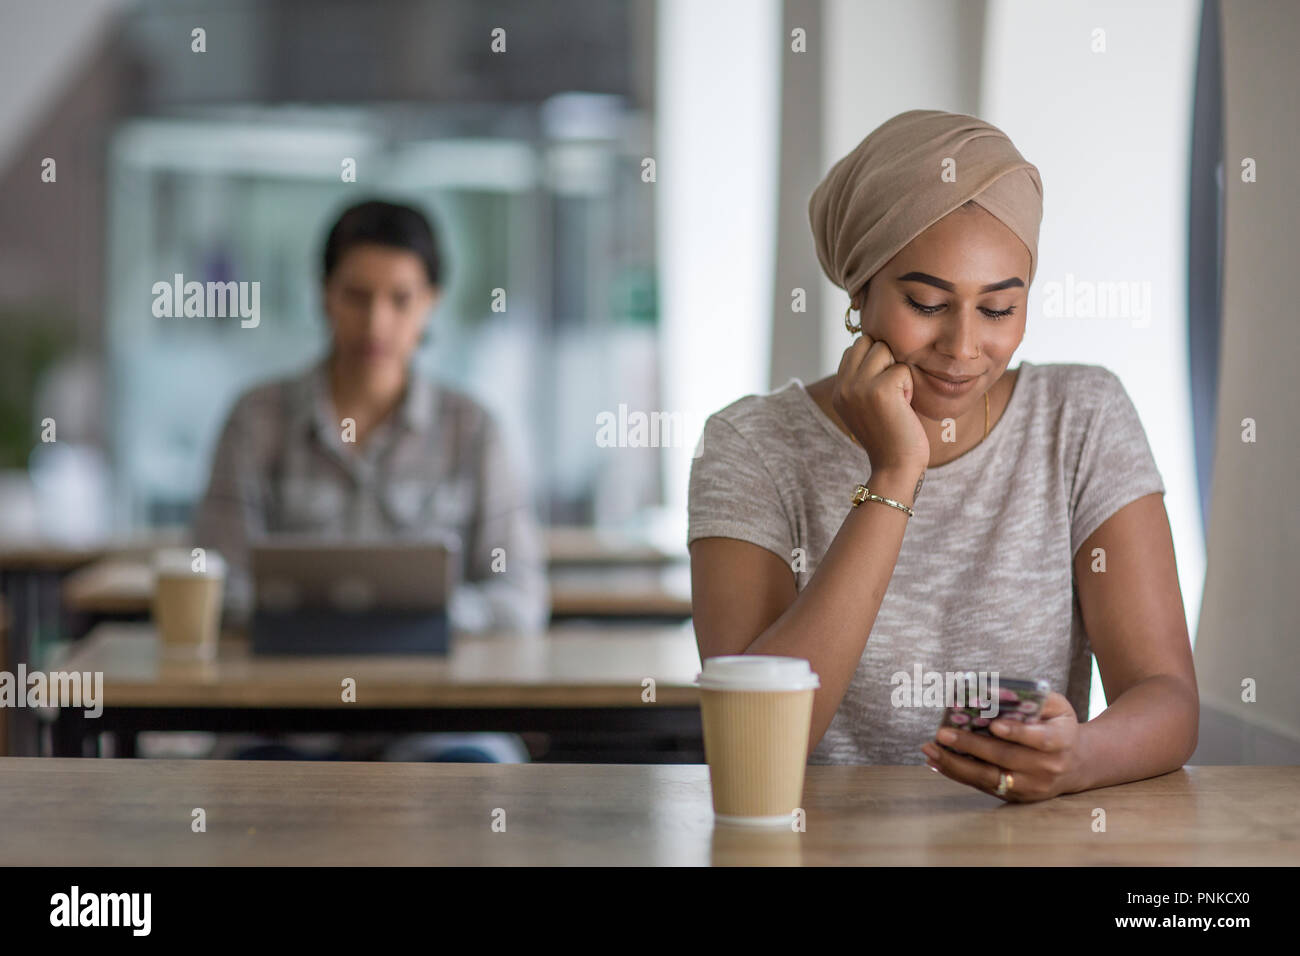 Young adult Muslim female using a smartphone in a cafe Stock Photo